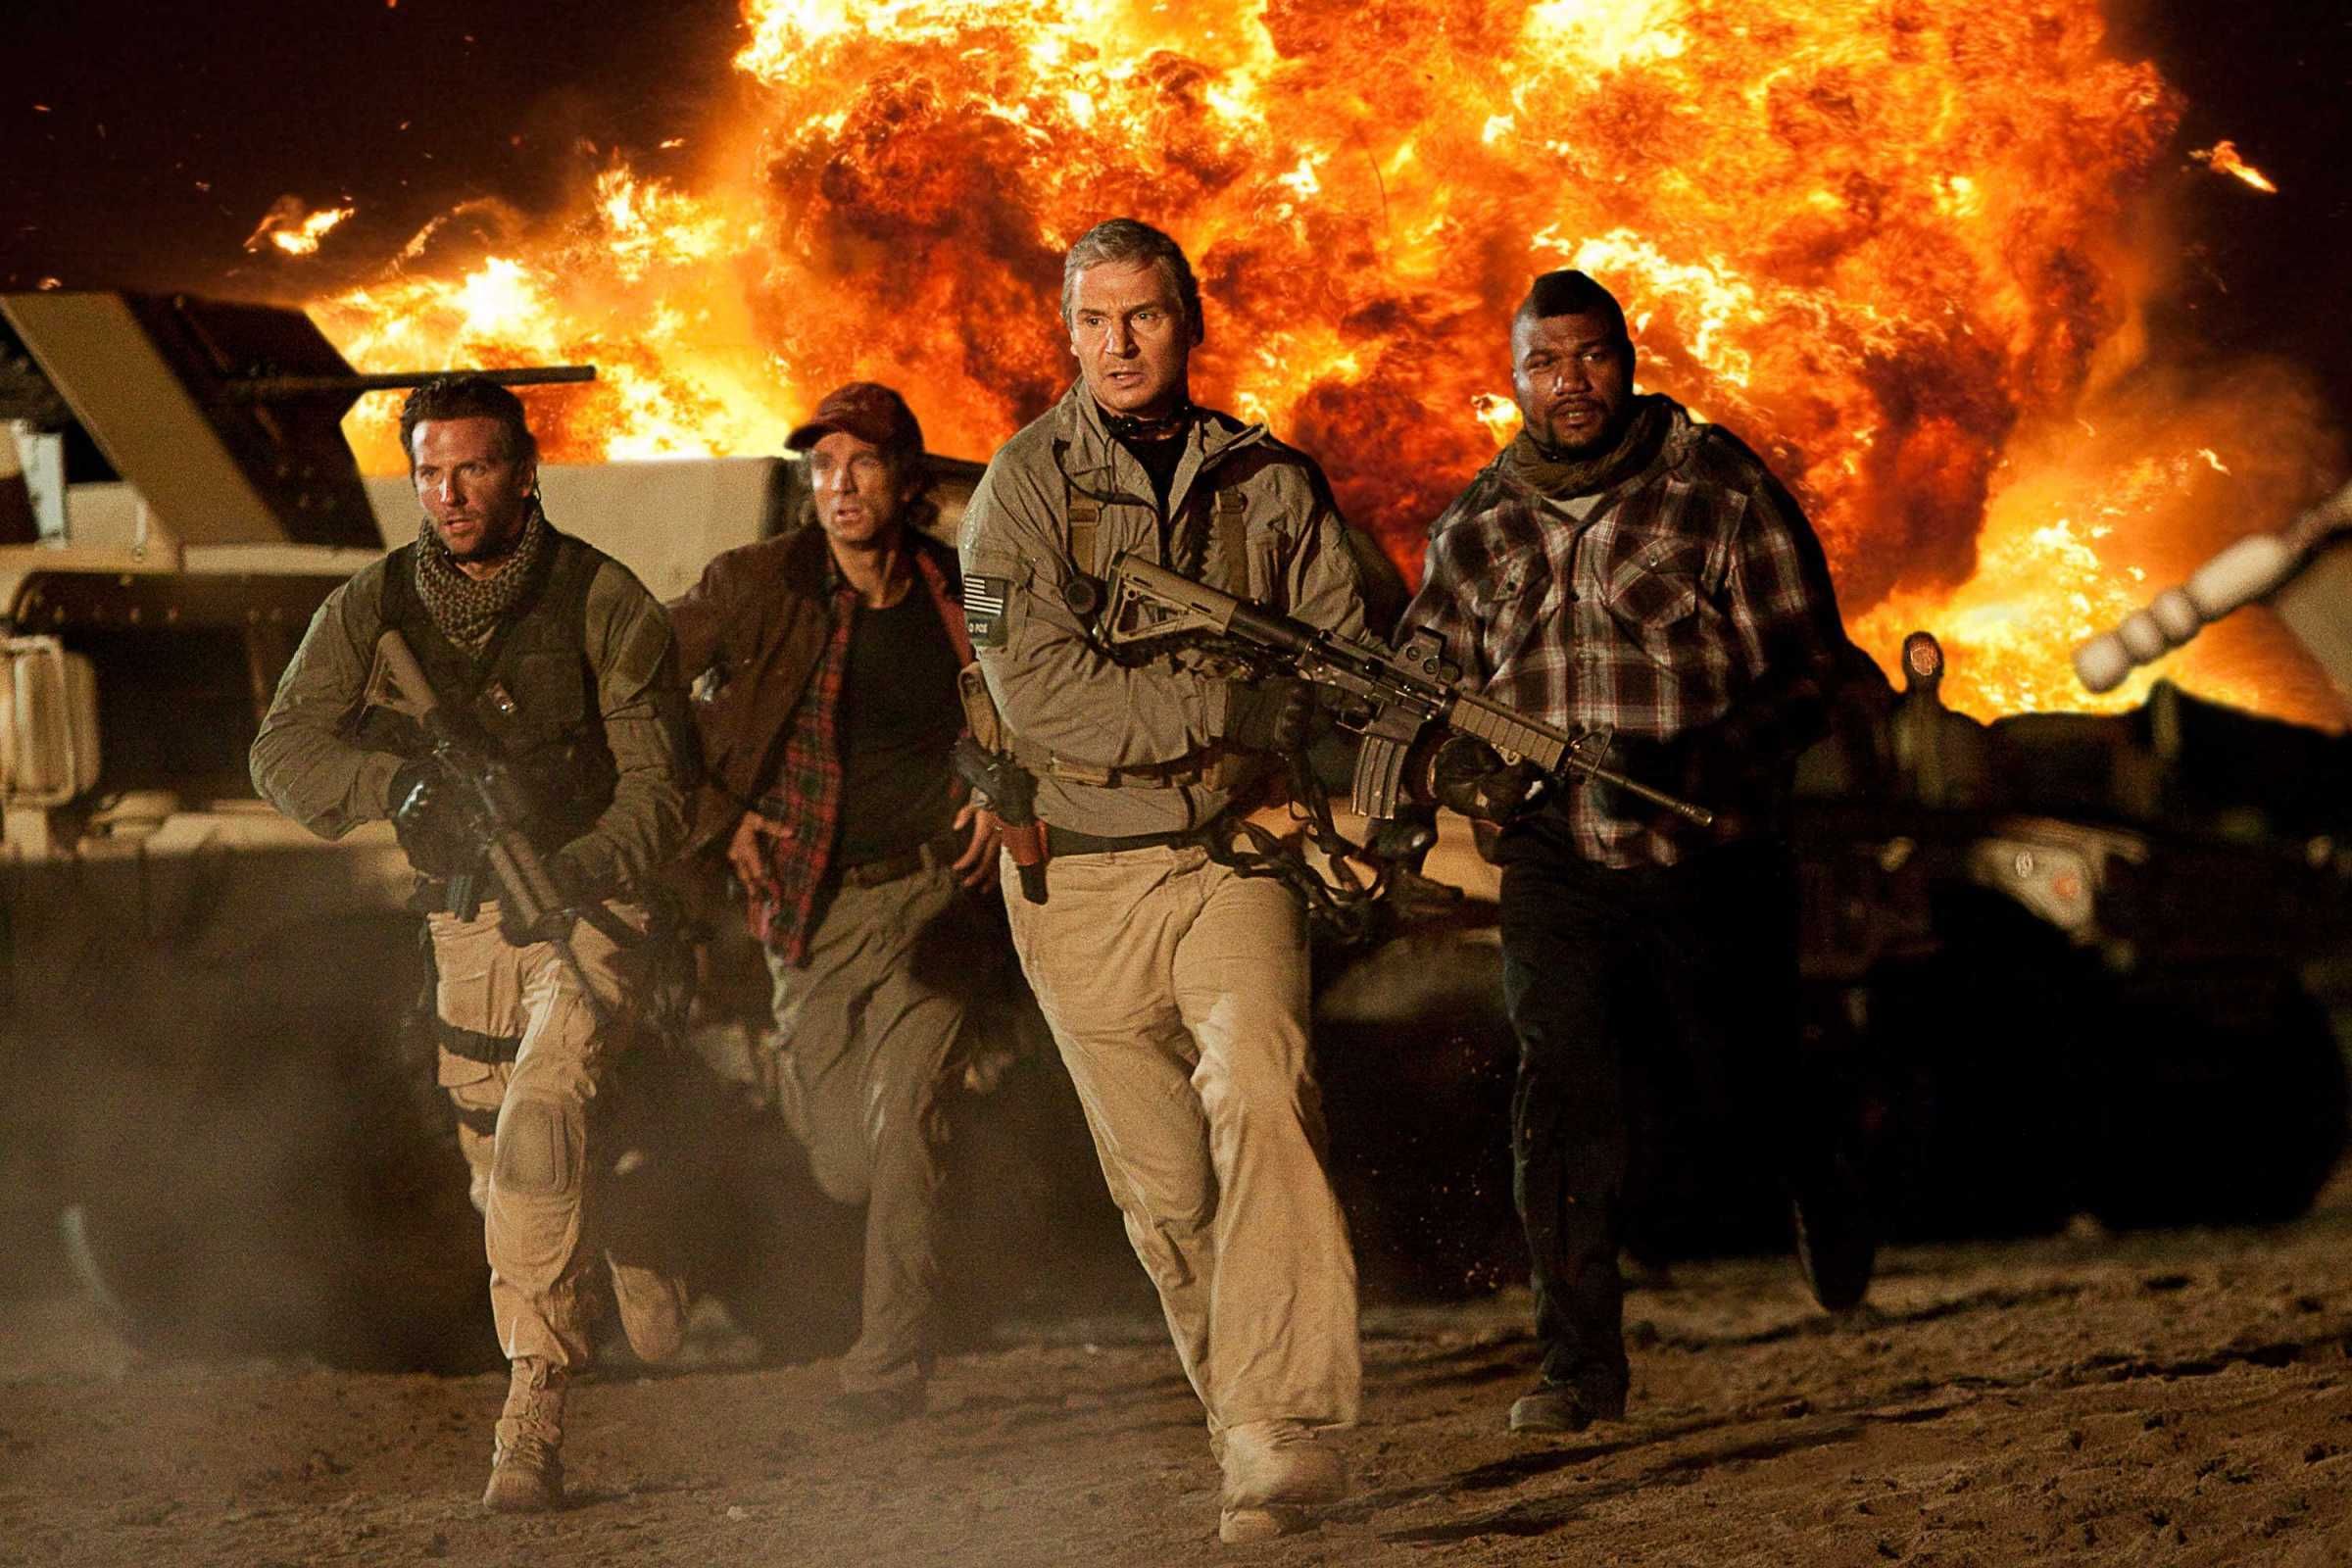 the a-team in 2010 running from an explosion